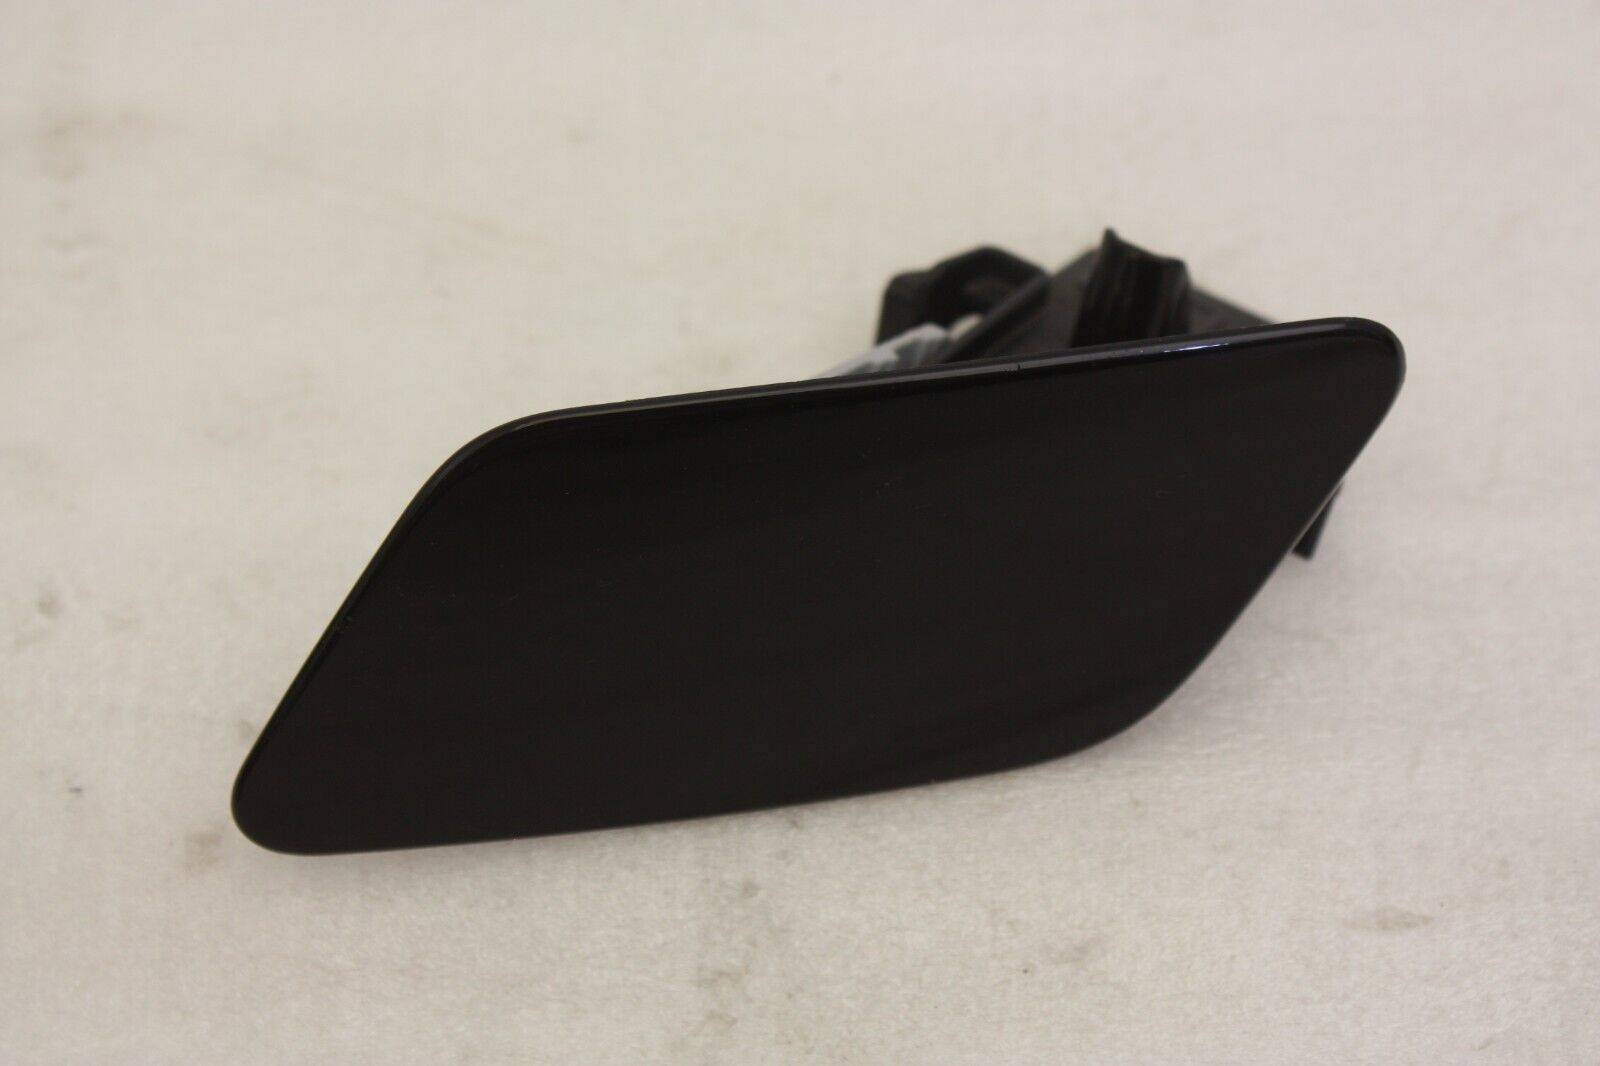 Audi-A3-Front-Bumper-Left-Side-Washer-Cover-8Y0955275-Genuine-176297416238